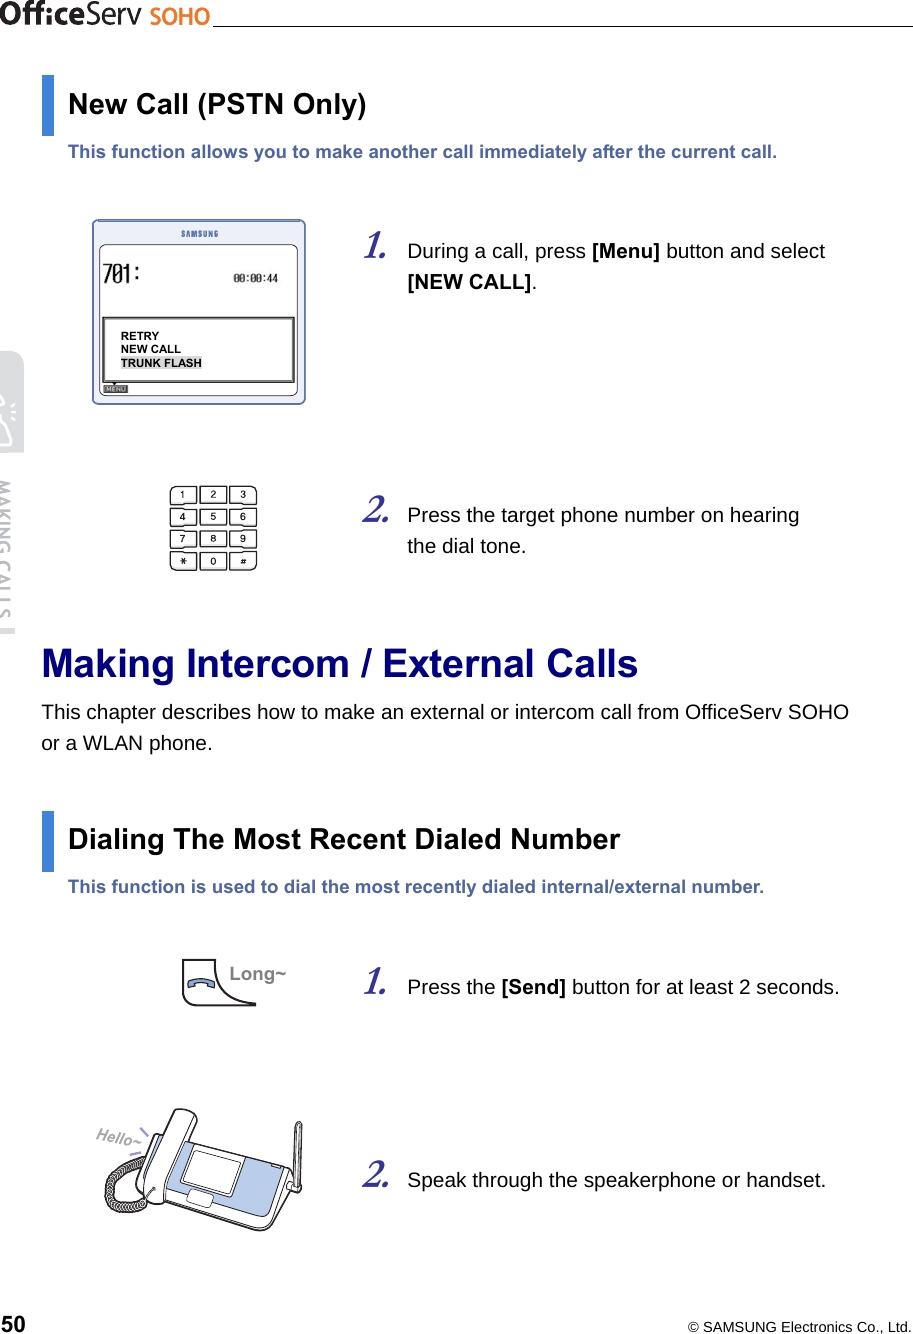    50  © SAMSUNG Electronics Co., Ltd. New Call (PSTN Only) This function allows you to make another call immediately after the current call.   1. During a call, press [Menu] button and select   [NEW CALL].       2. Press the target phone number on hearing   the dial tone.     Making Intercom / External Calls This chapter describes how to make an external or intercom call from OfficeServ SOHO or a WLAN phone.  Dialing The Most Recent Dialed Number This function is used to dial the most recently dialed internal/external number.   1. Press the [Send] button for at least 2 seconds.     2. Speak through the speakerphone or handset.     Long~RETRY NEW CALL TRUNK FLASH 